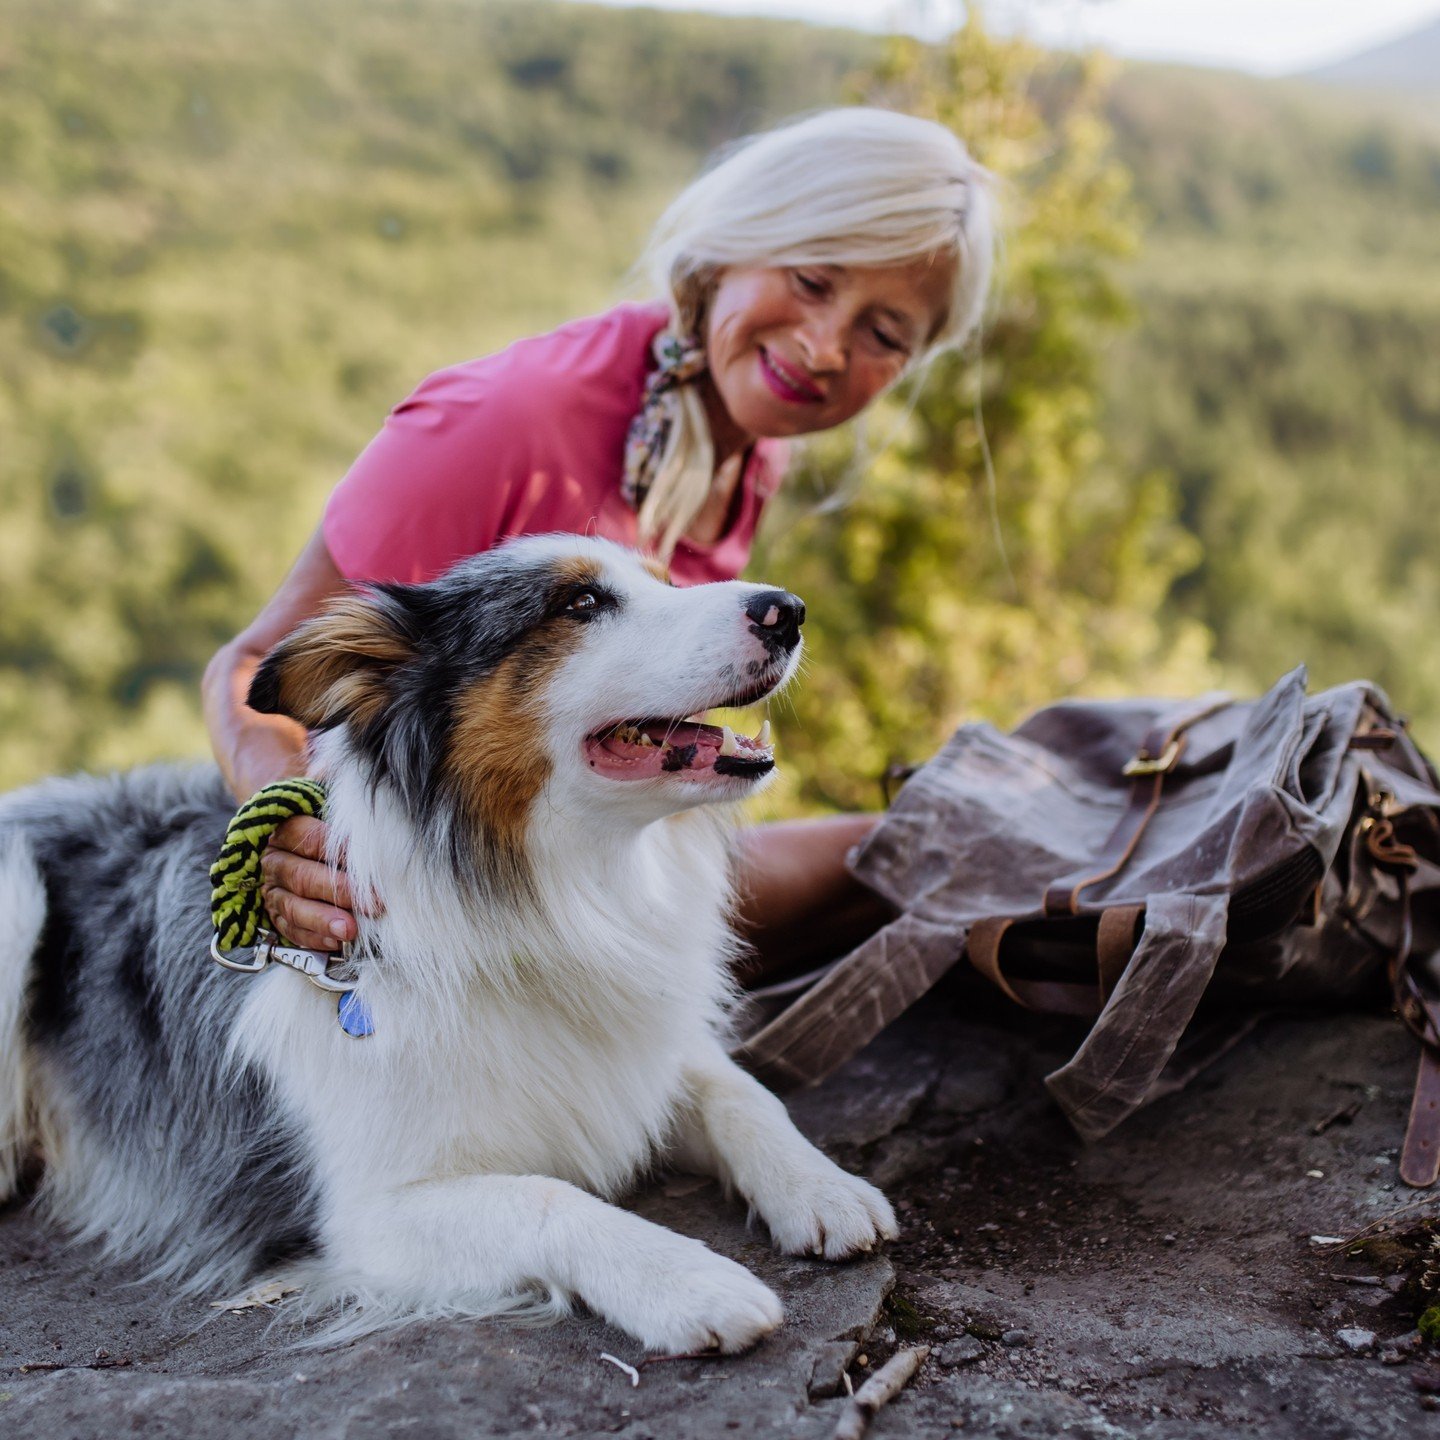 The end of every adventure calls for lots of pets, and maybe a few behind-the-ear scratches too 🐾 ⛰️ 

#TriumphTogether #TriumphPack #TrailsAndTails